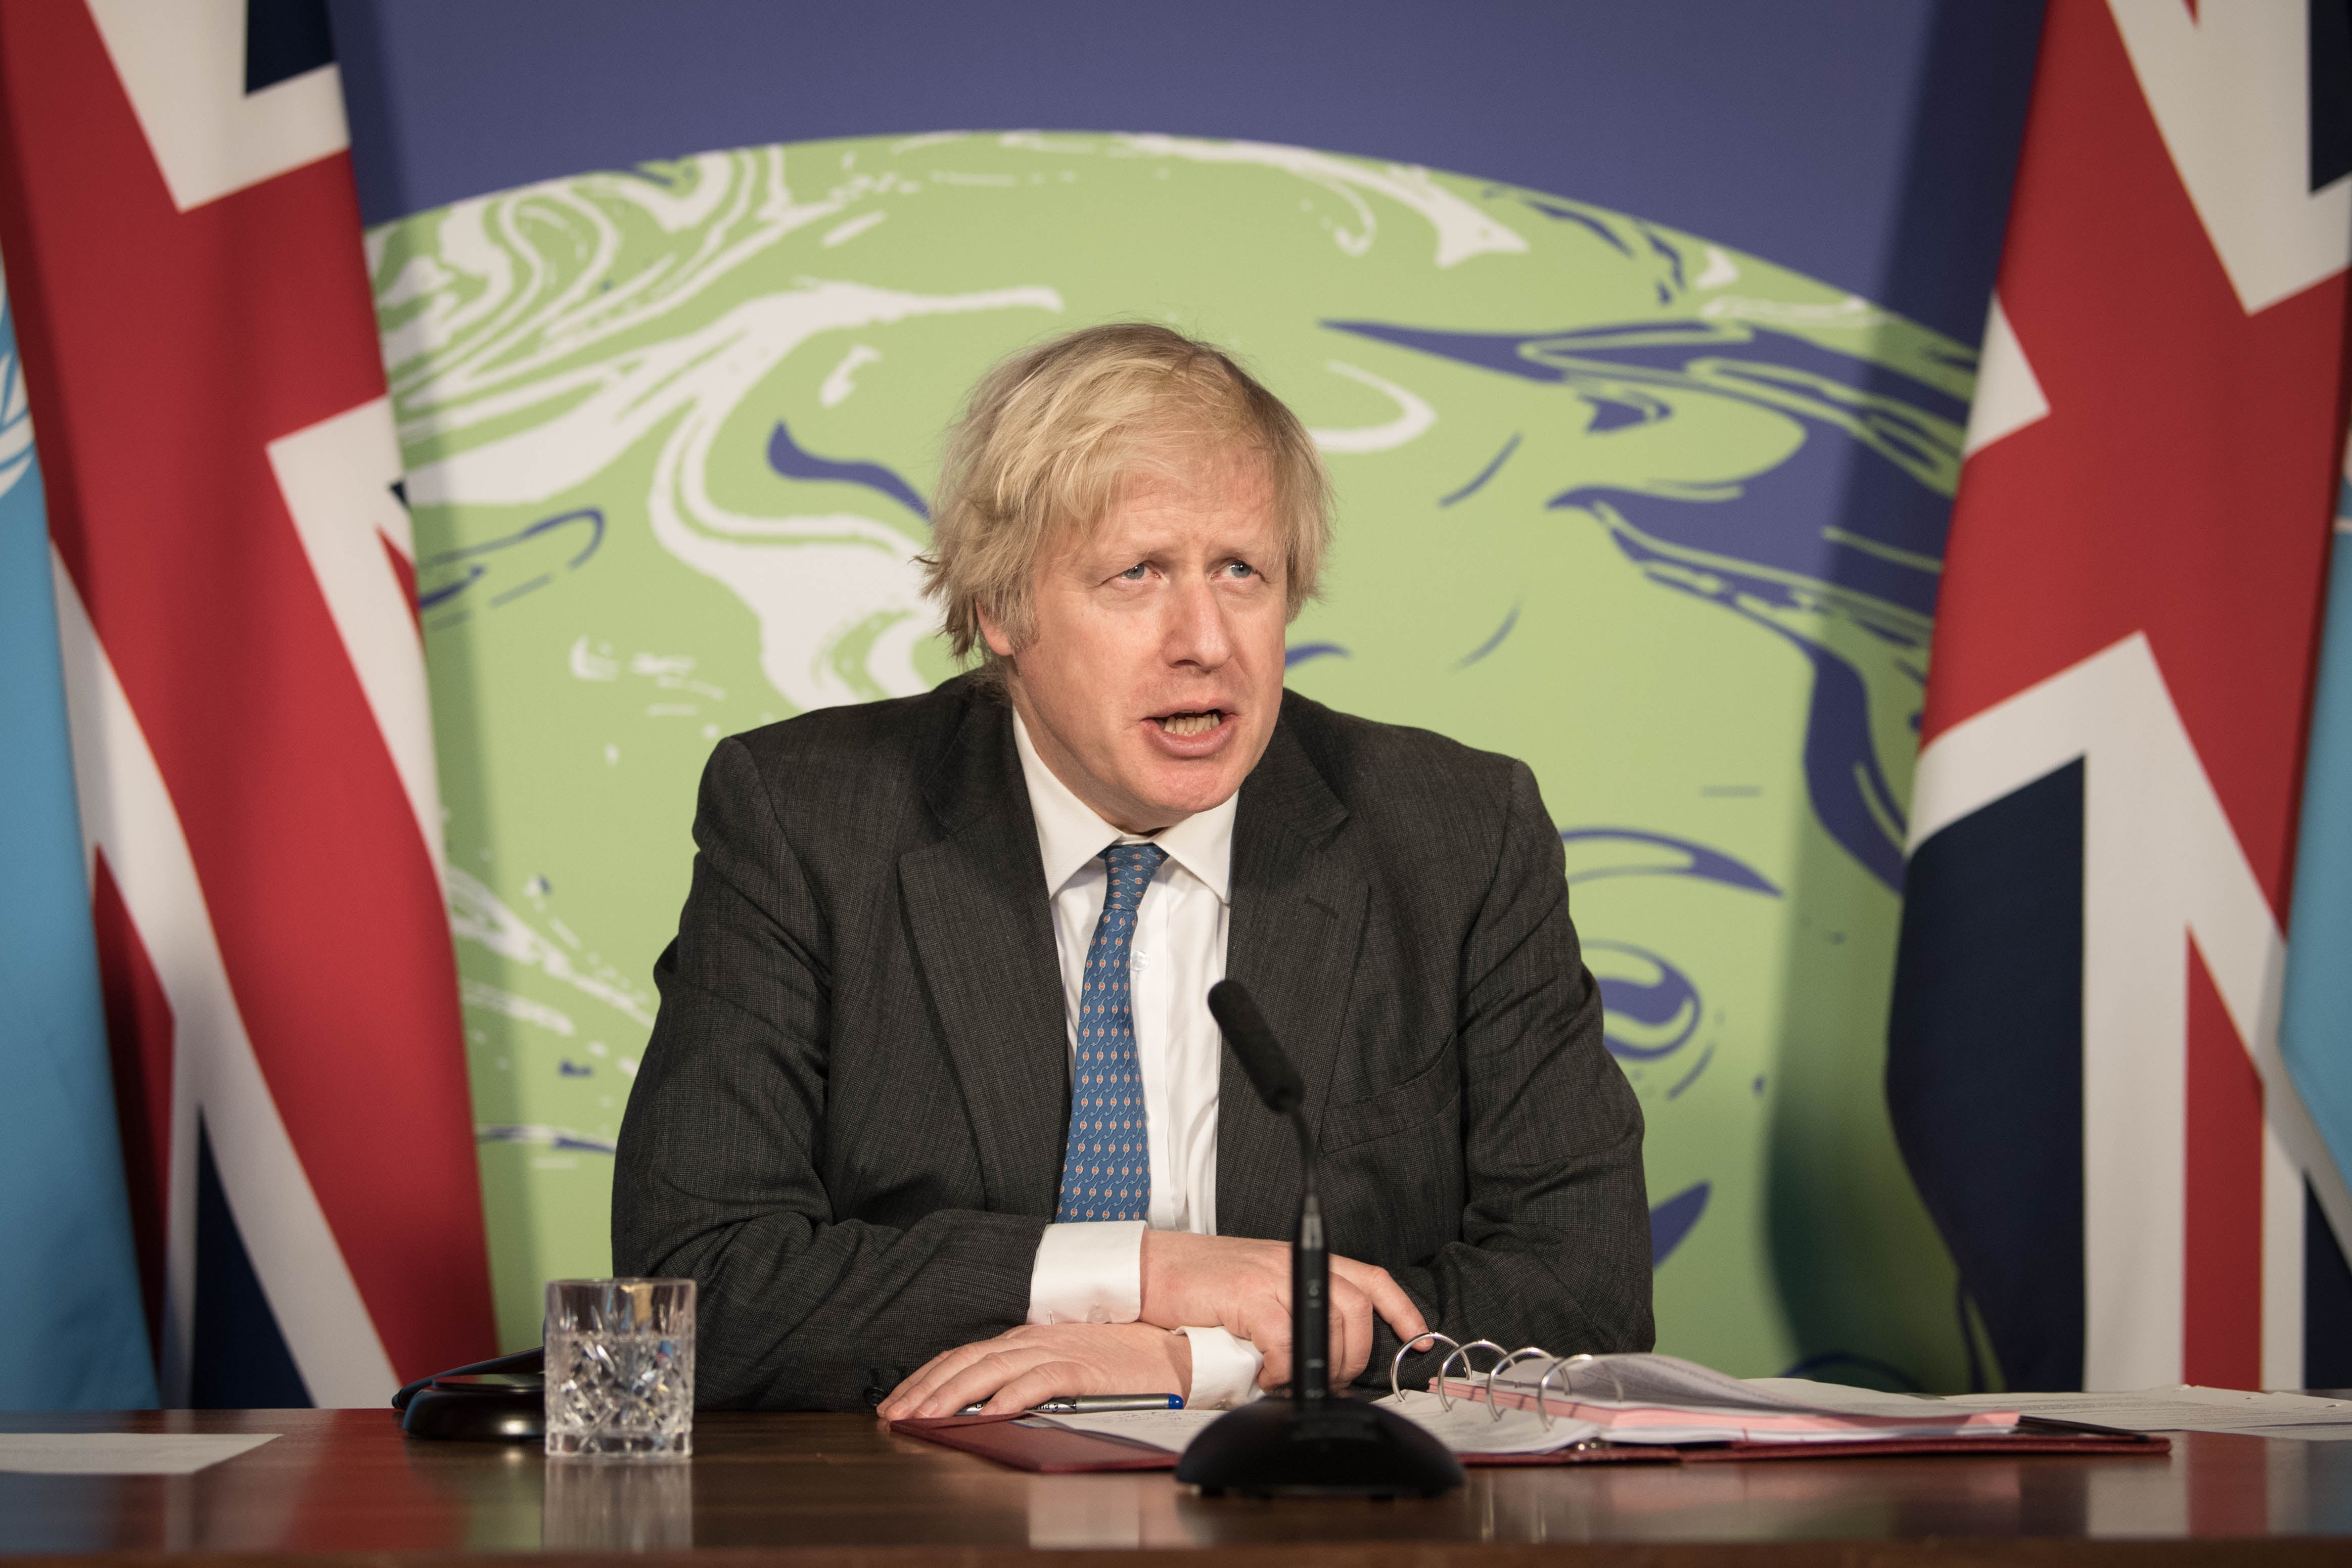 Boris Johnson has said he is ‘very worried’ the Cop26 summit could end up a failure